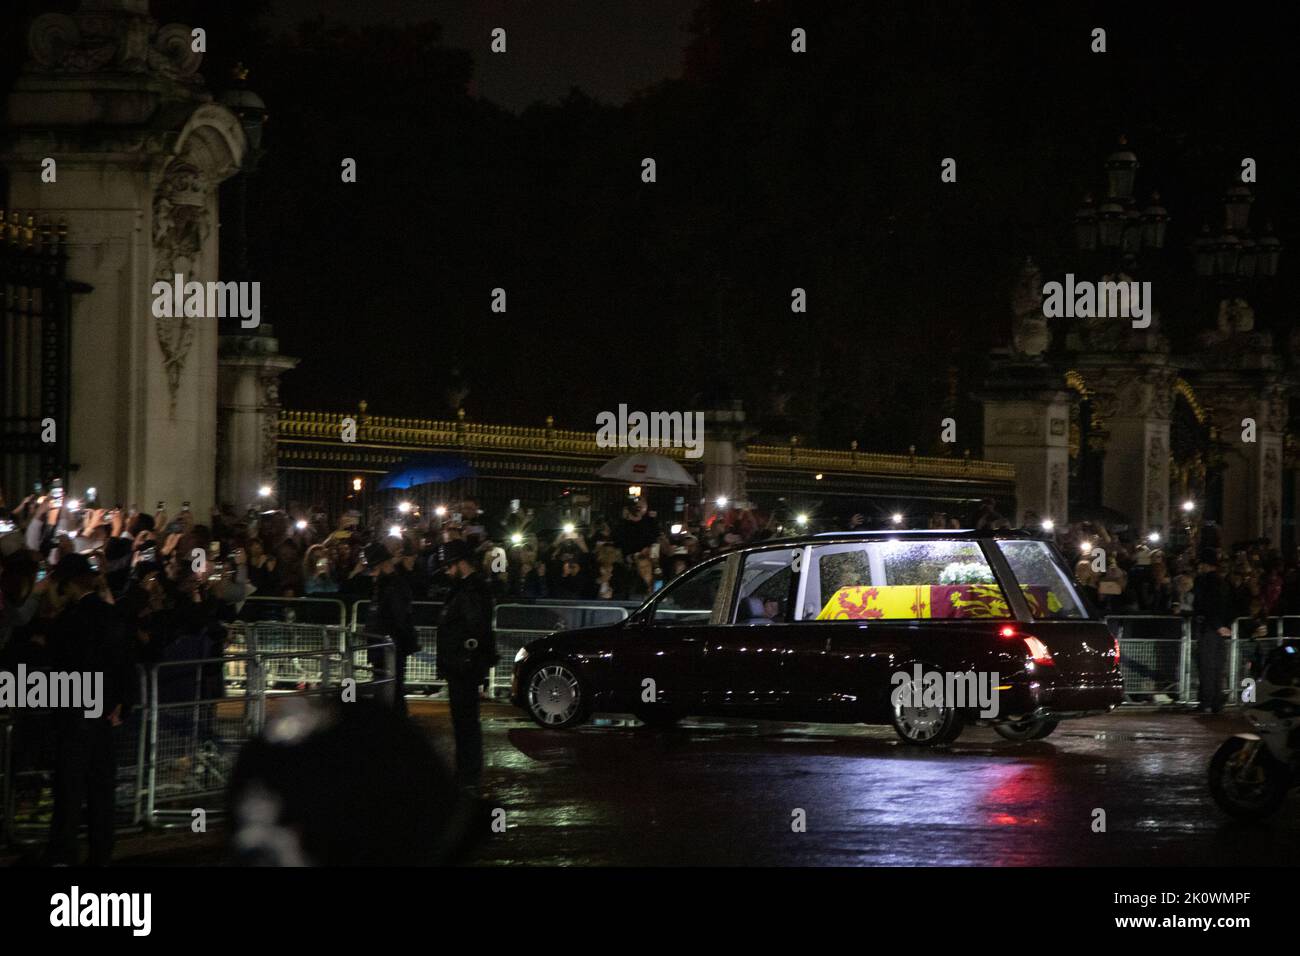 London, England. 13th September, 2022. Mourners have lined the street in front of Buckingham Palace to pay their respects as the Queen makes her last journey to Buckingham Palace. Credit: Kiki Streitberger / Alamy Live News Stock Photo